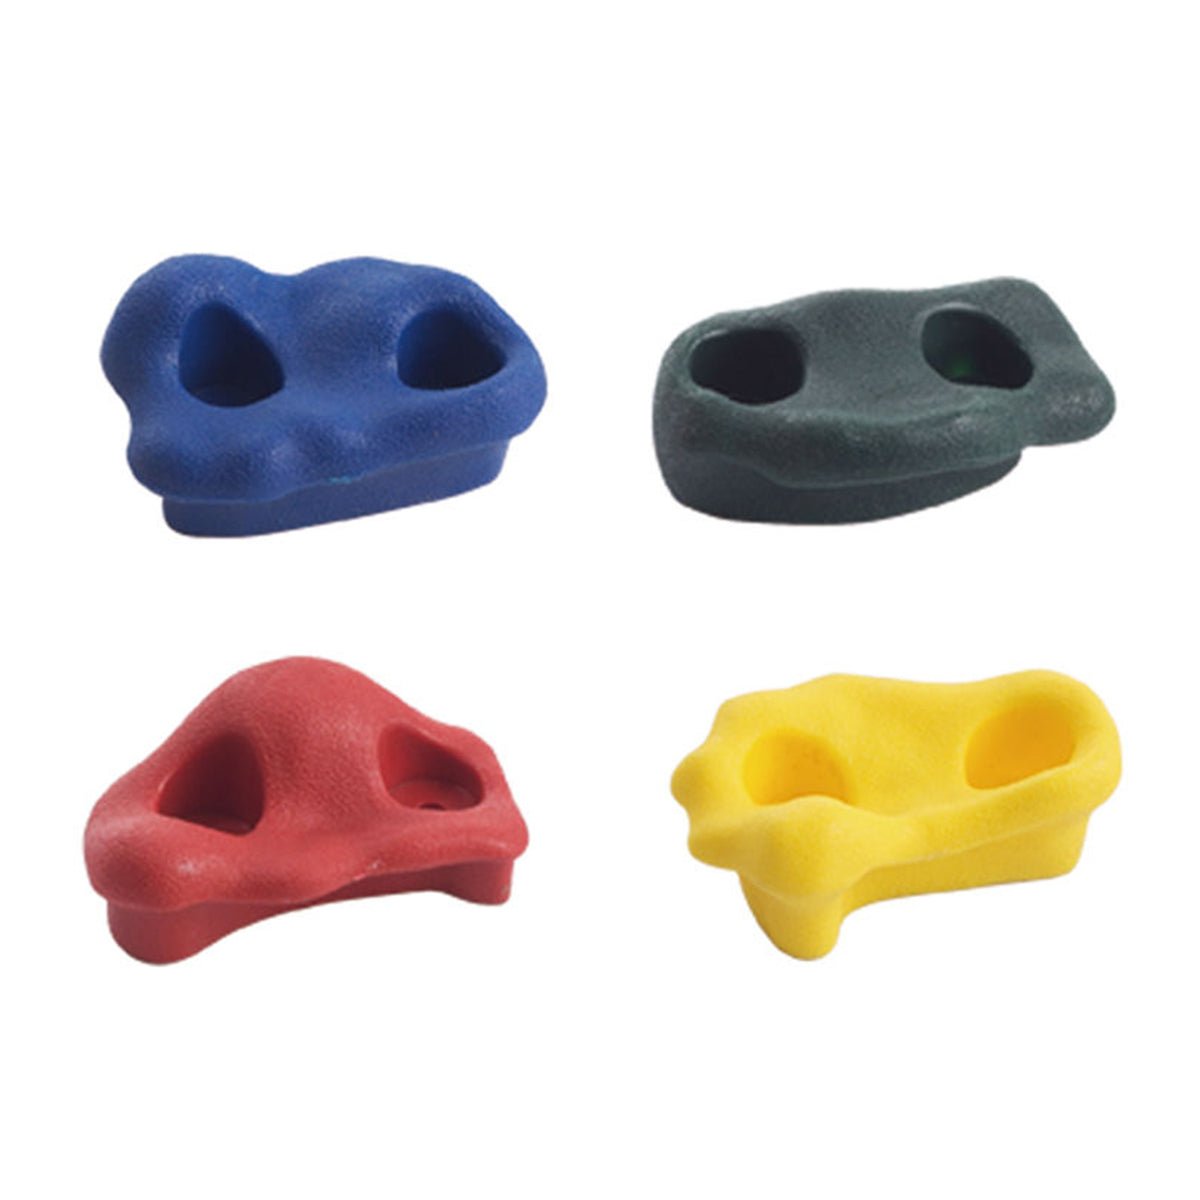 Shop Small Climbing Rock Set 4: Colorful Adventure for Active Kids